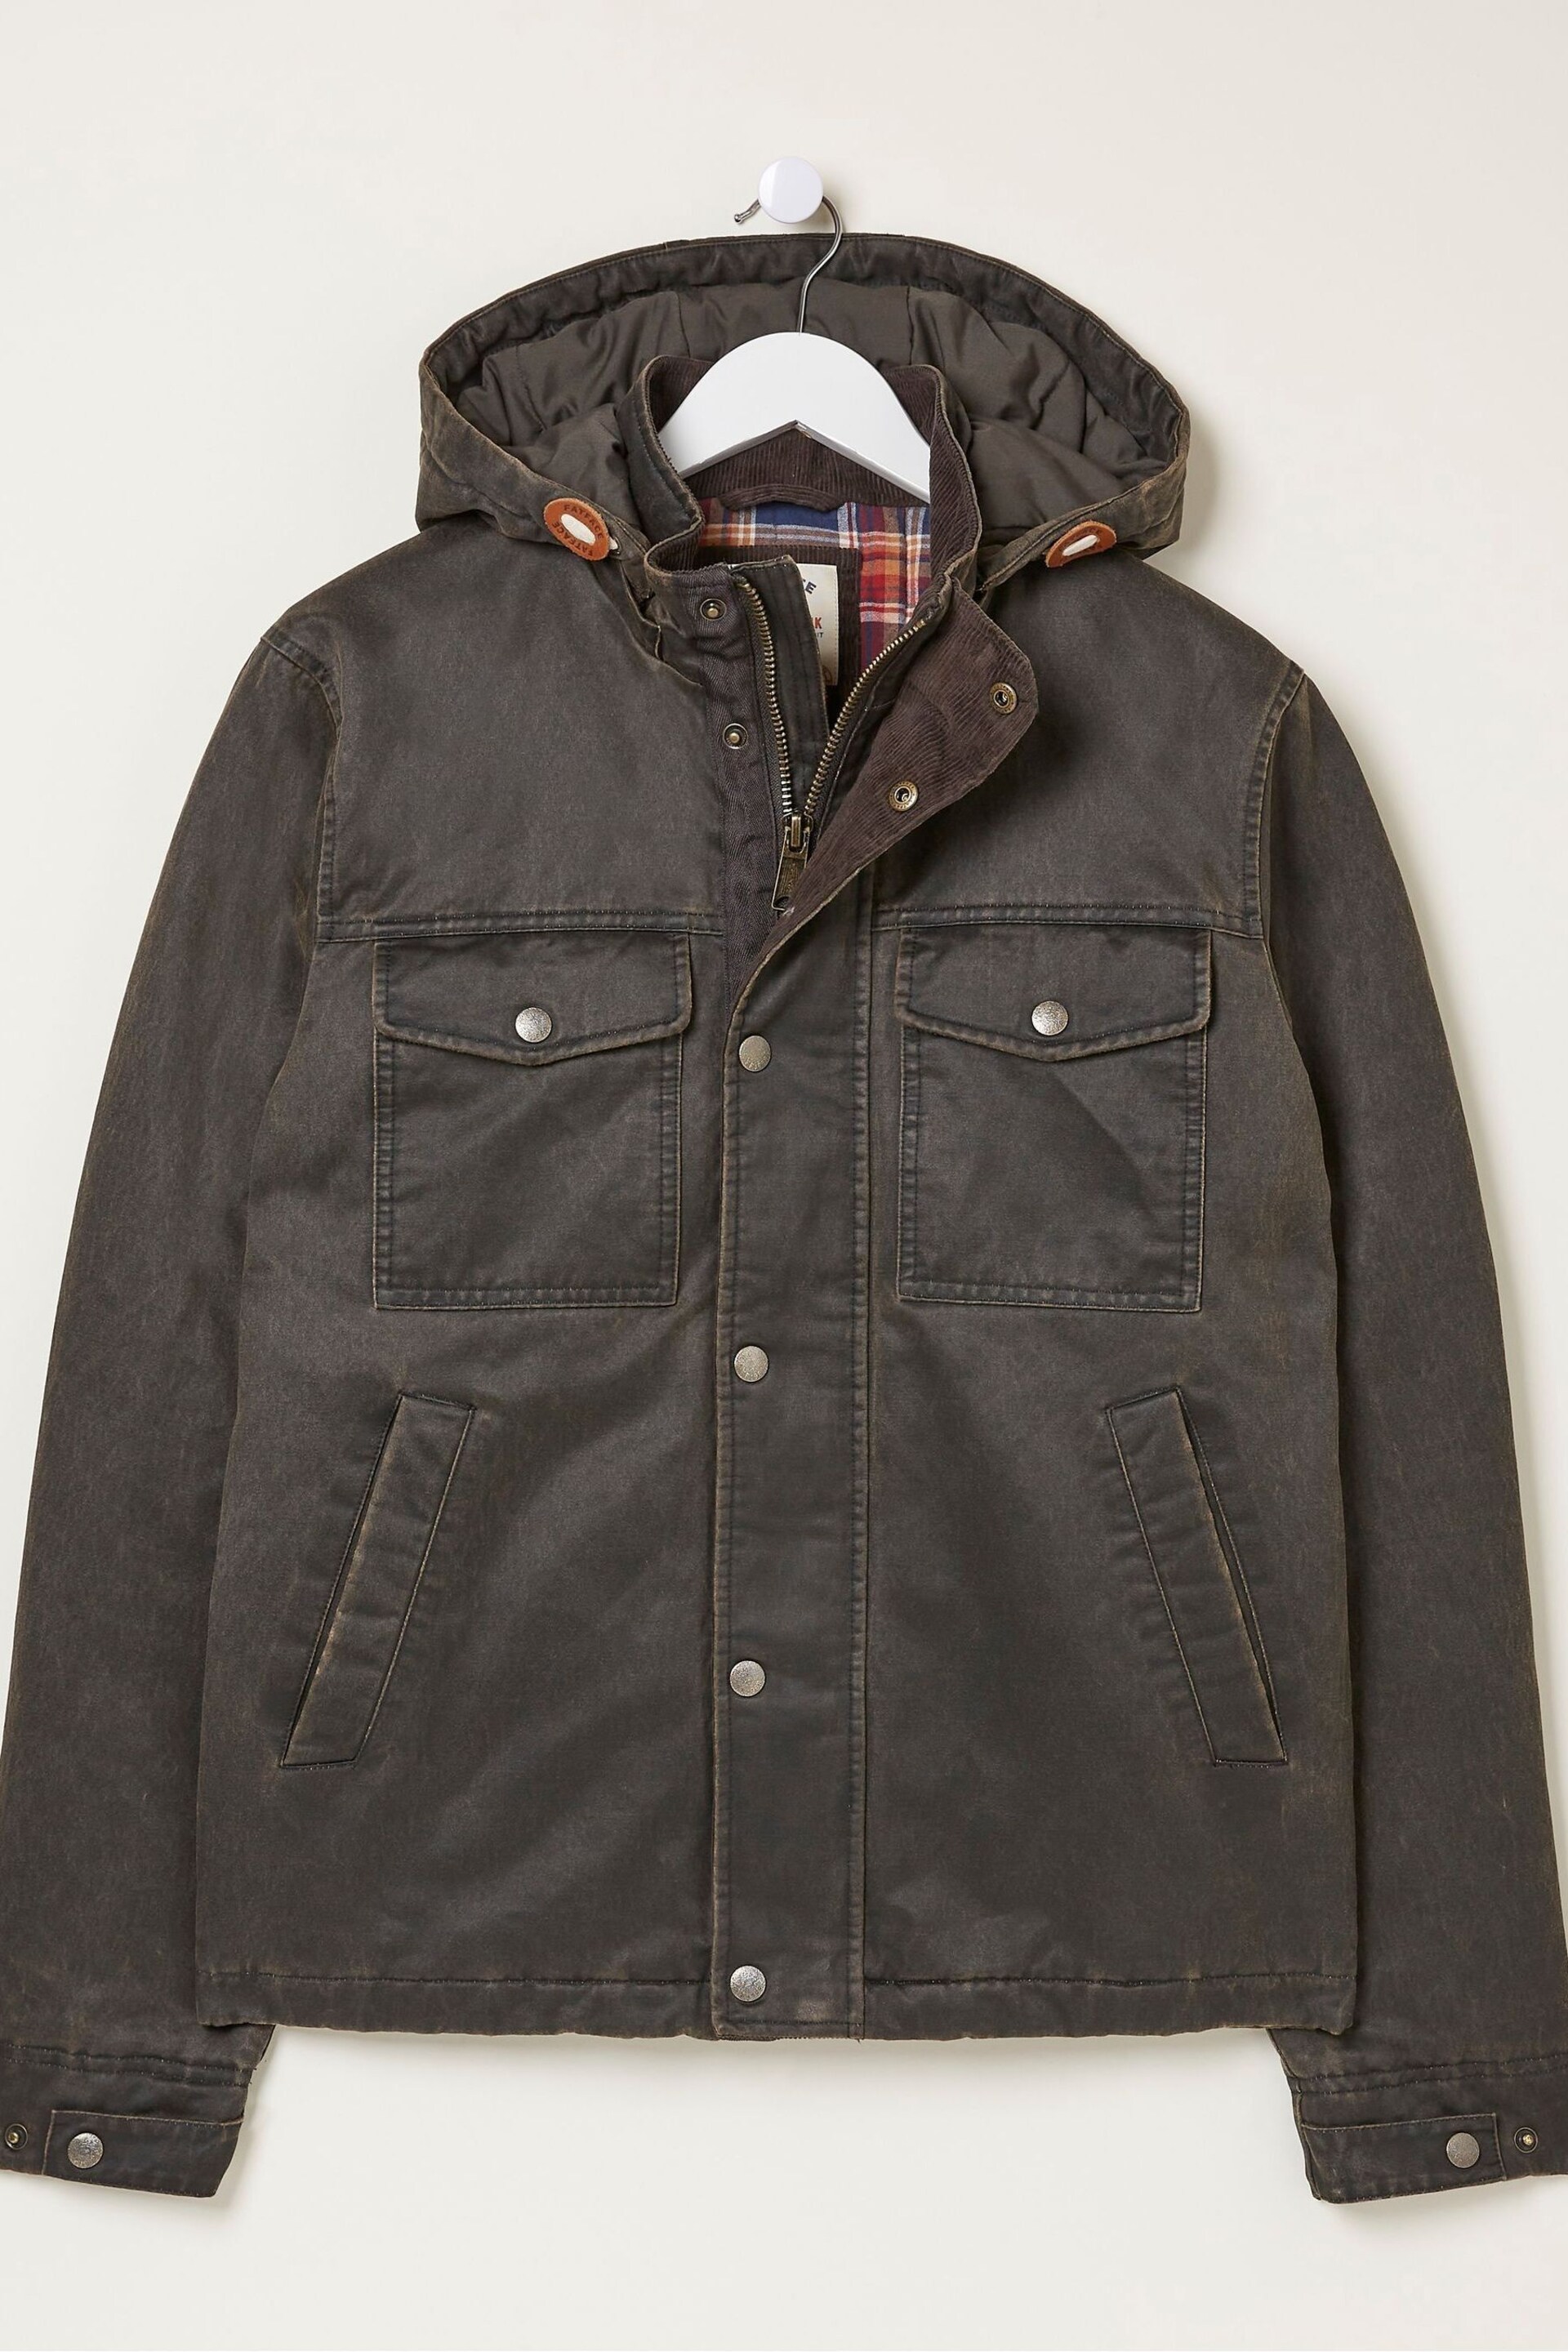 FatFace Brown Hadley Hooded Jacket - Image 6 of 6